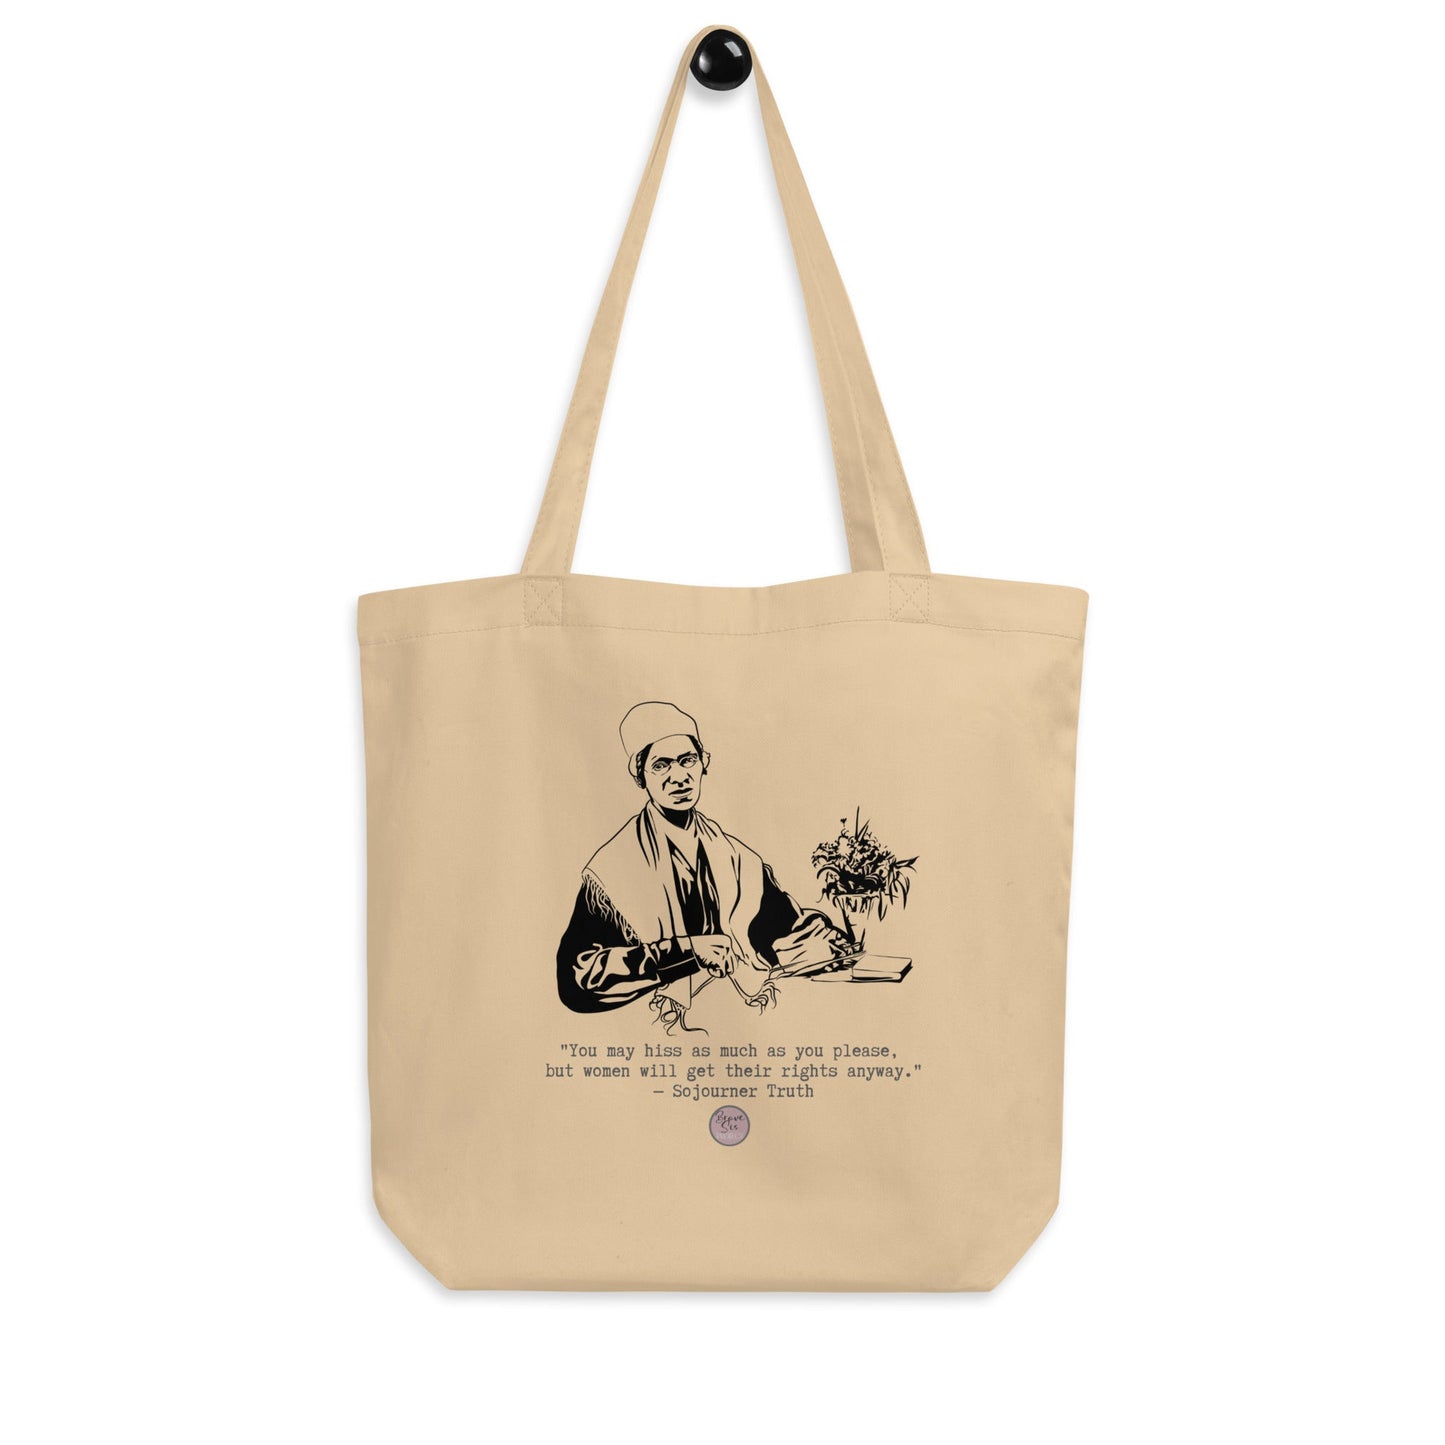 Sojourner Truth "Women Will Get Their Rights" Eco Tote Bag